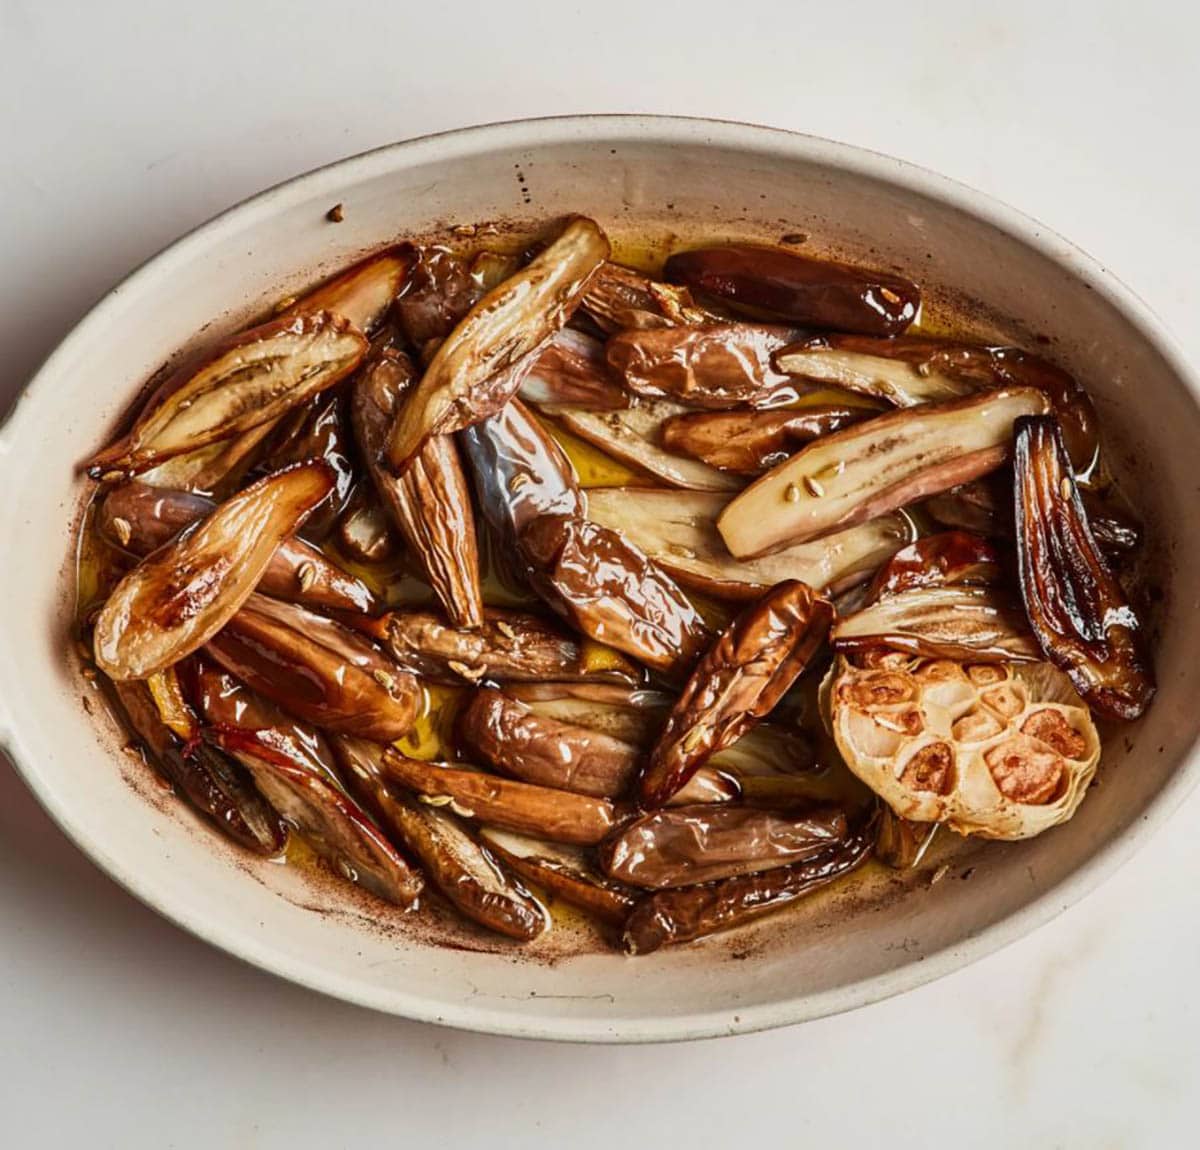 Slow Cooked Eggplant in a oval bowl